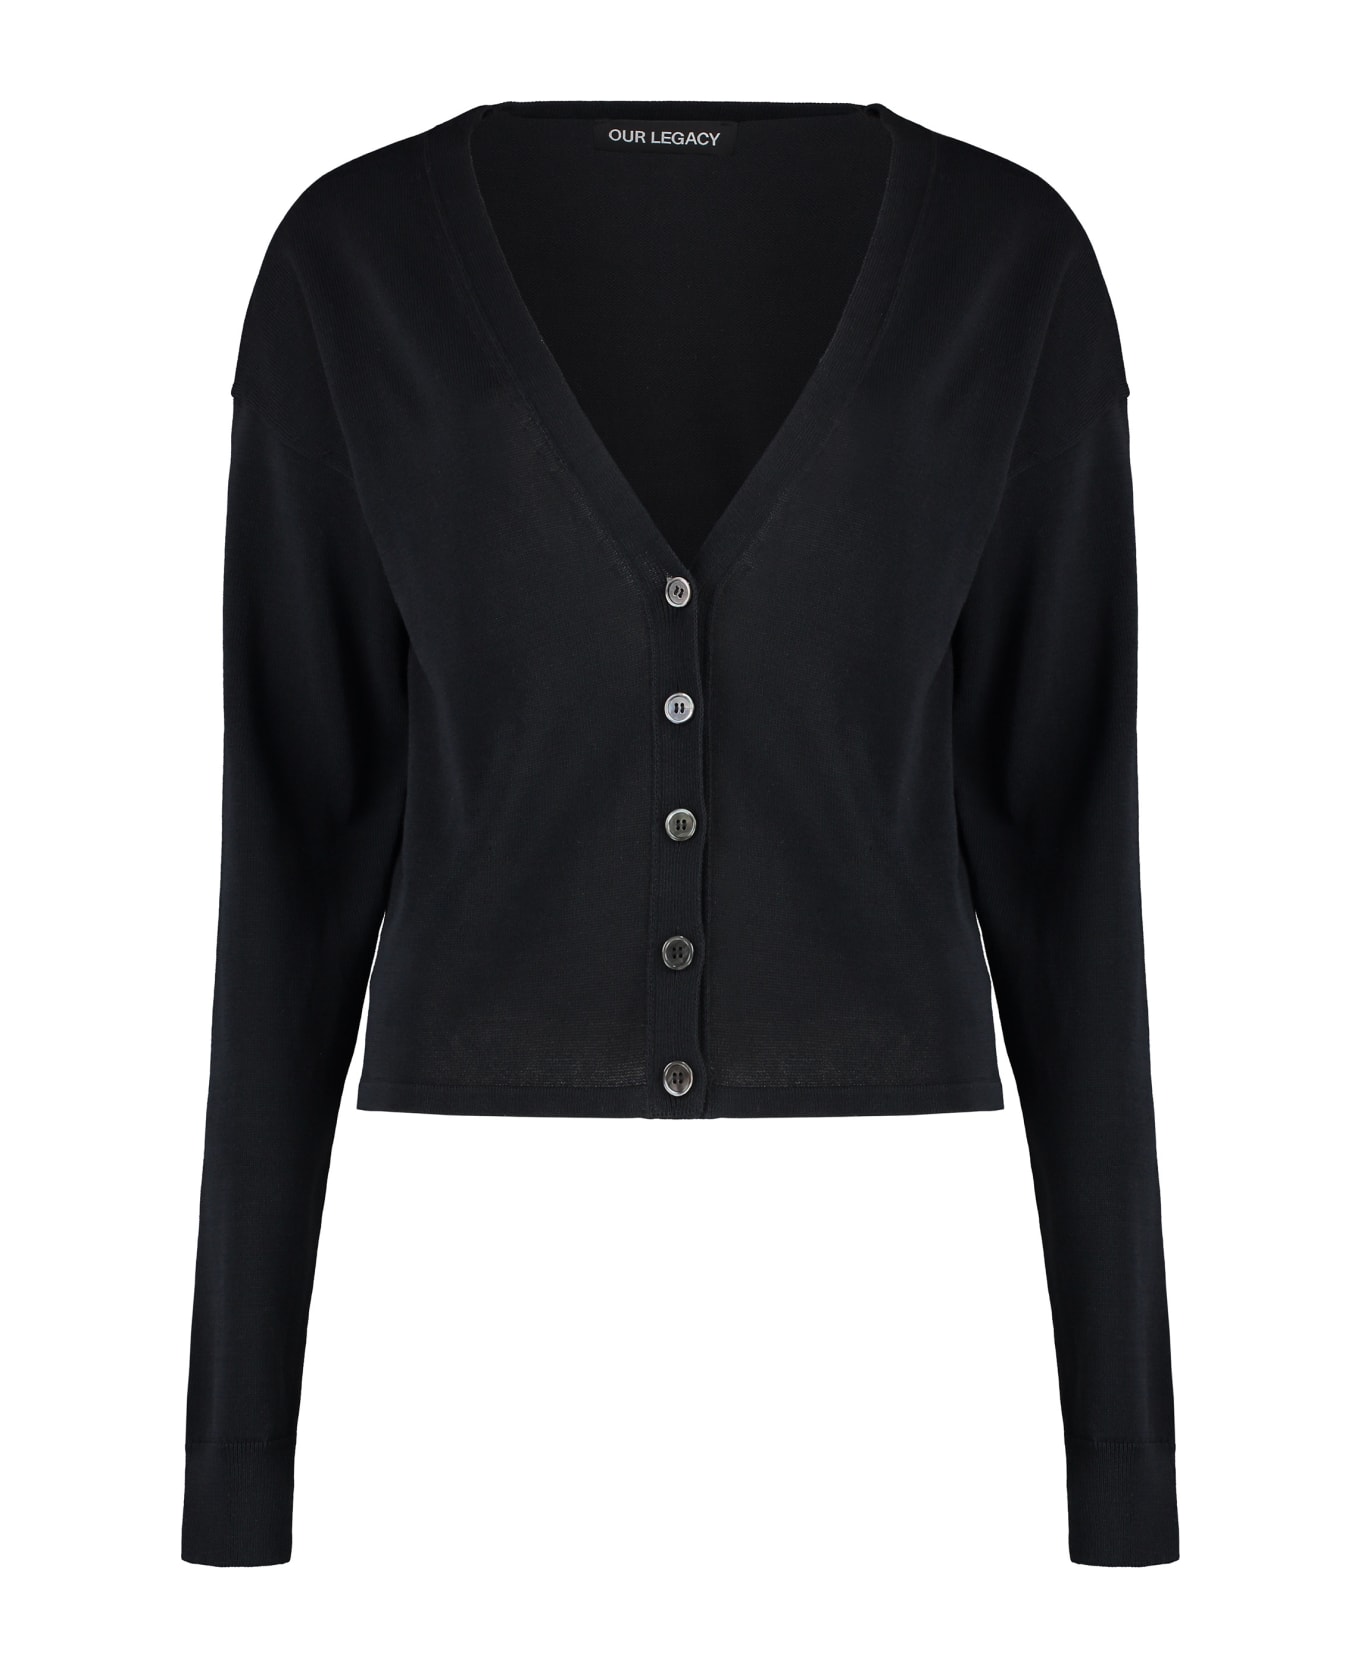 Our Legacy Ivy Cotton Cardigan - black